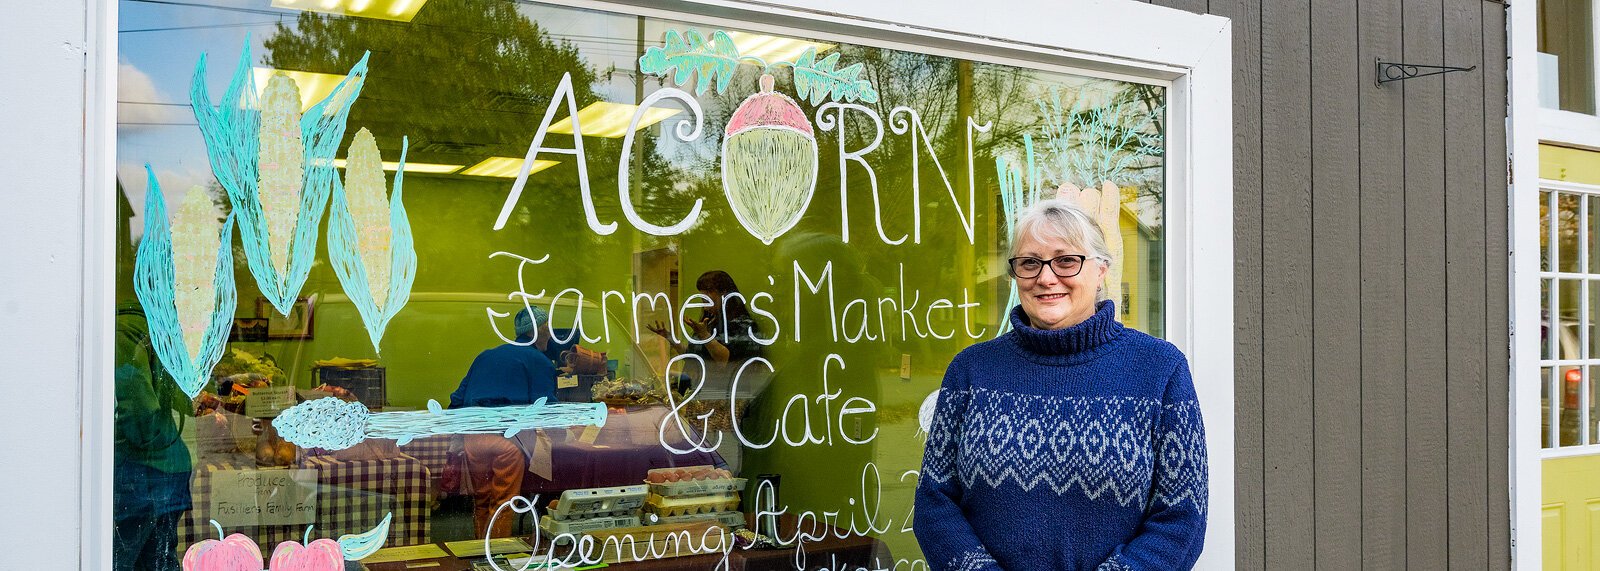 5 Healthy Towns coalition member Ruth Vanbogelen at the future home of Acorn Farmers' Market and Cafe in Manchester.